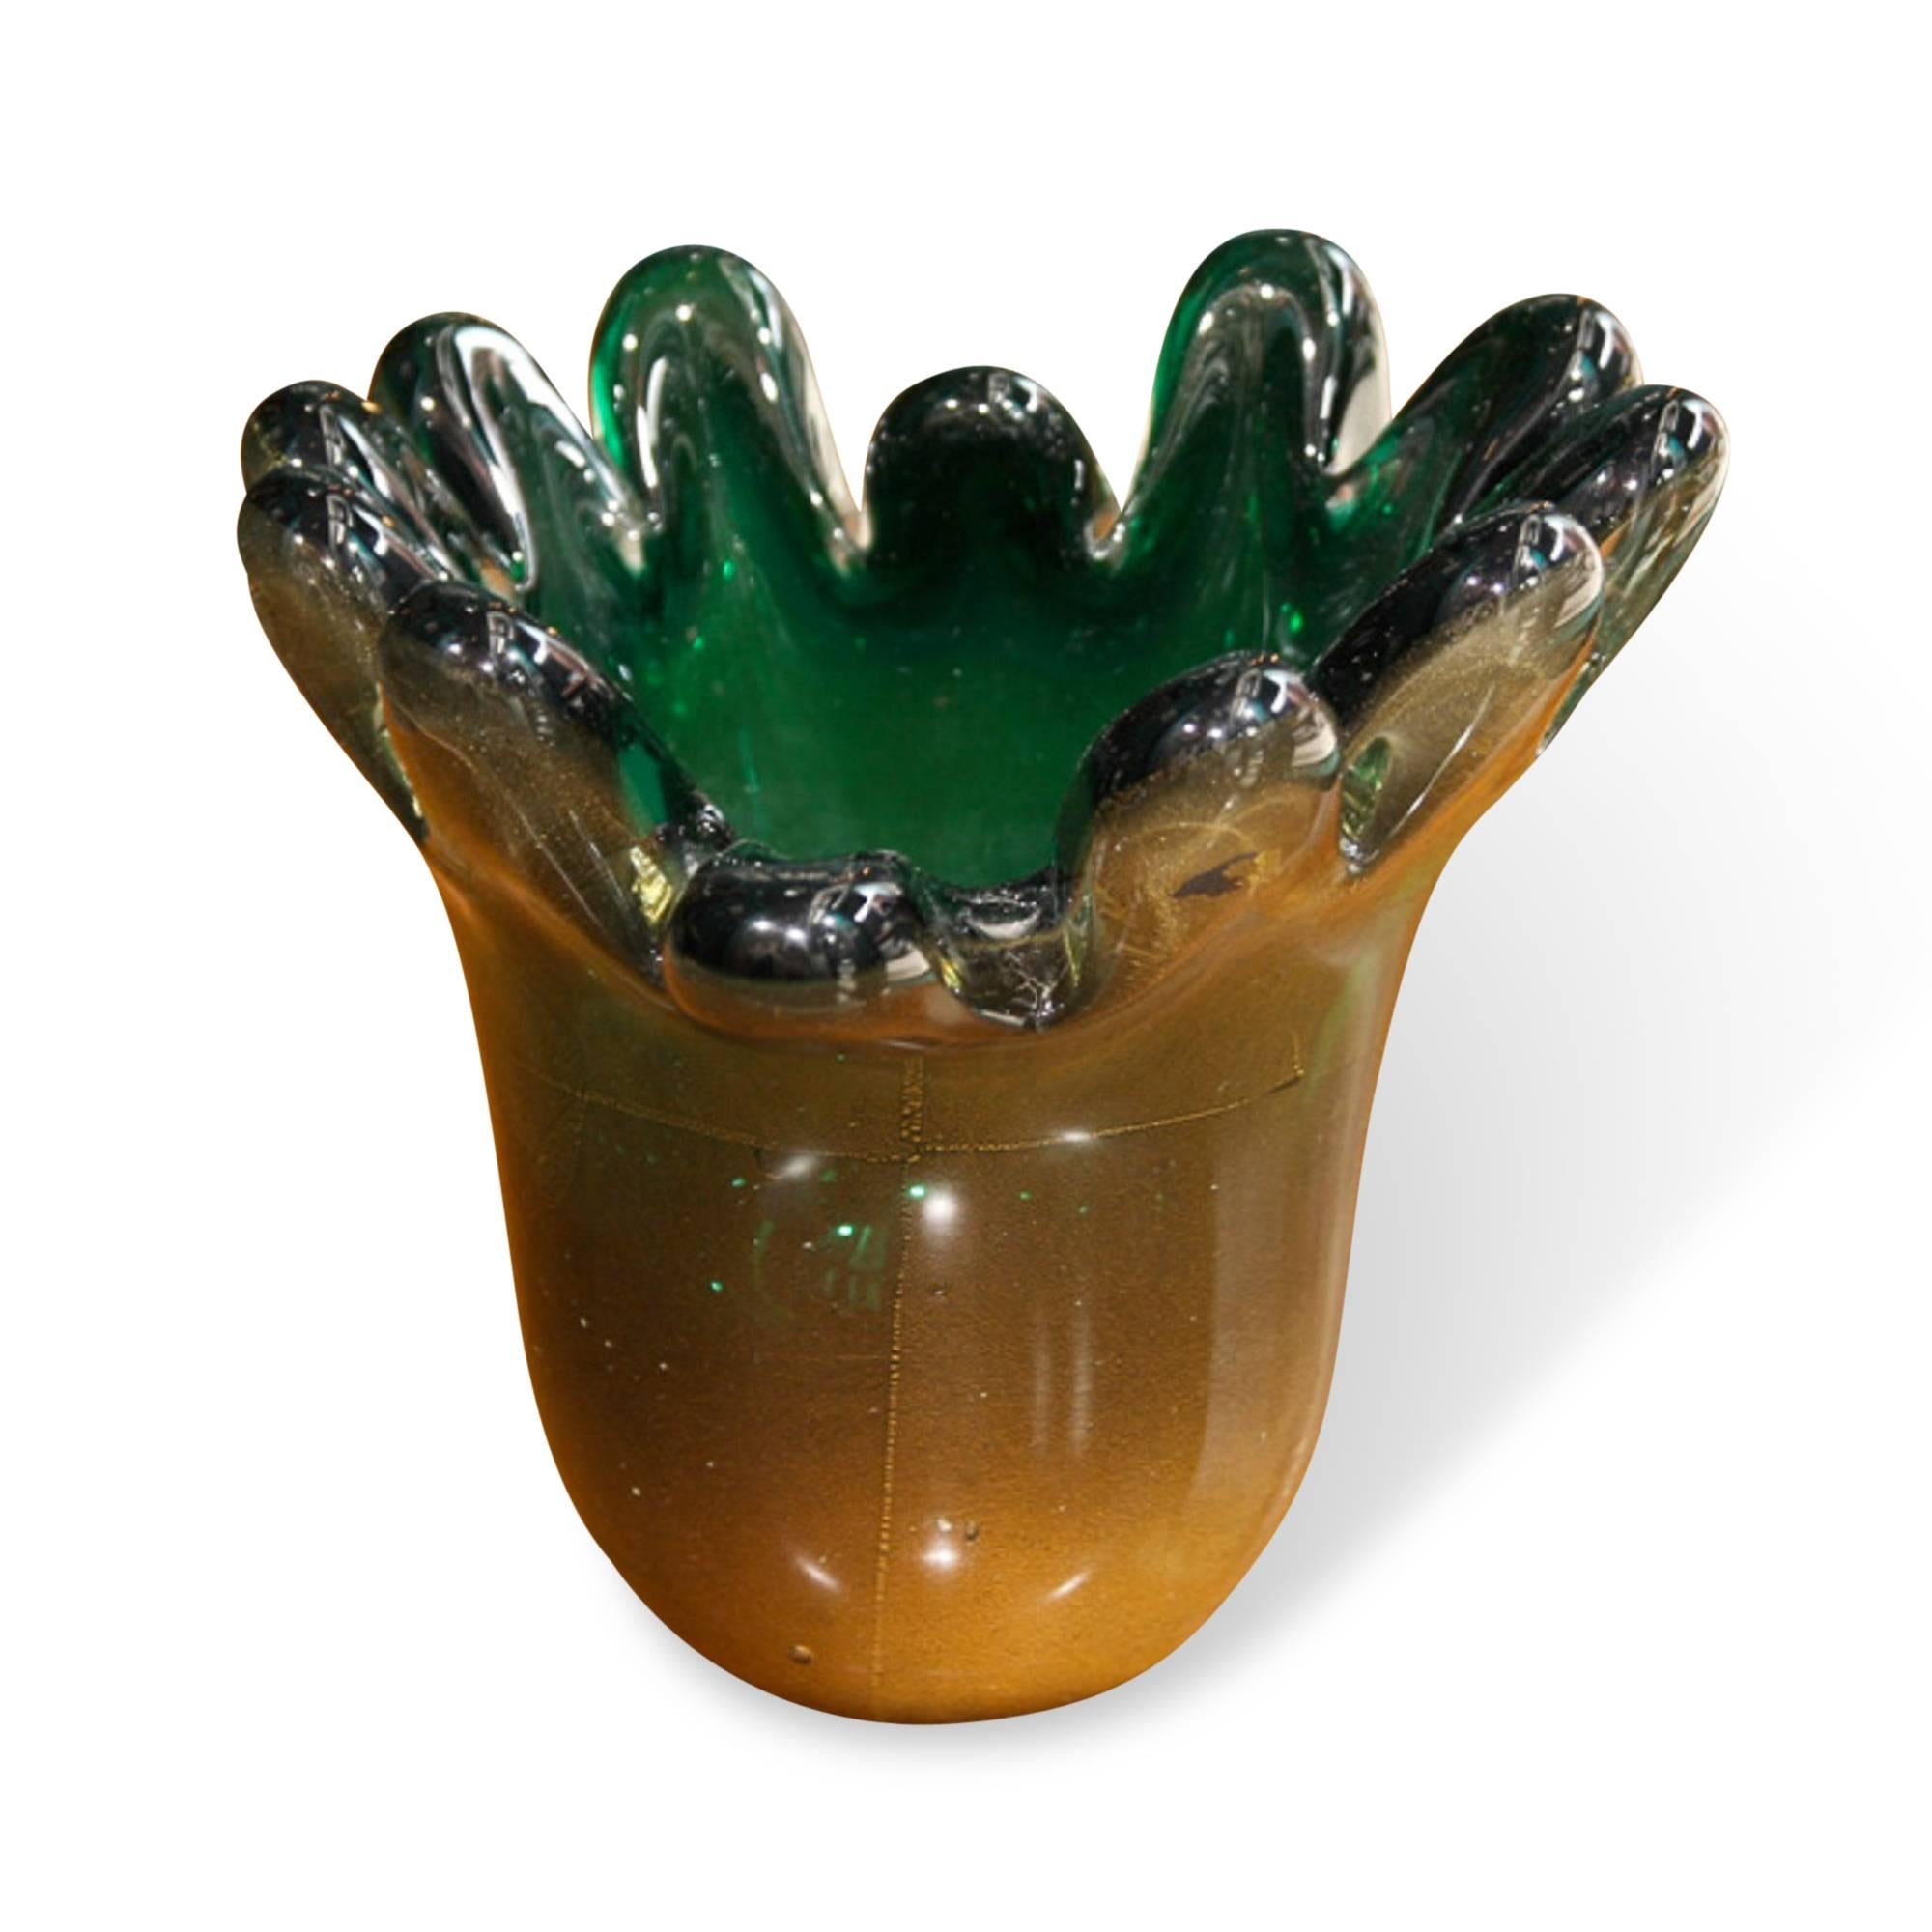 Glass vase with green interior, with multiple finger-like elements protruding from the rim by Archimede Seguso, Italian, circa 1960. Measures: 8 1/2 in diameter, 8 in height.